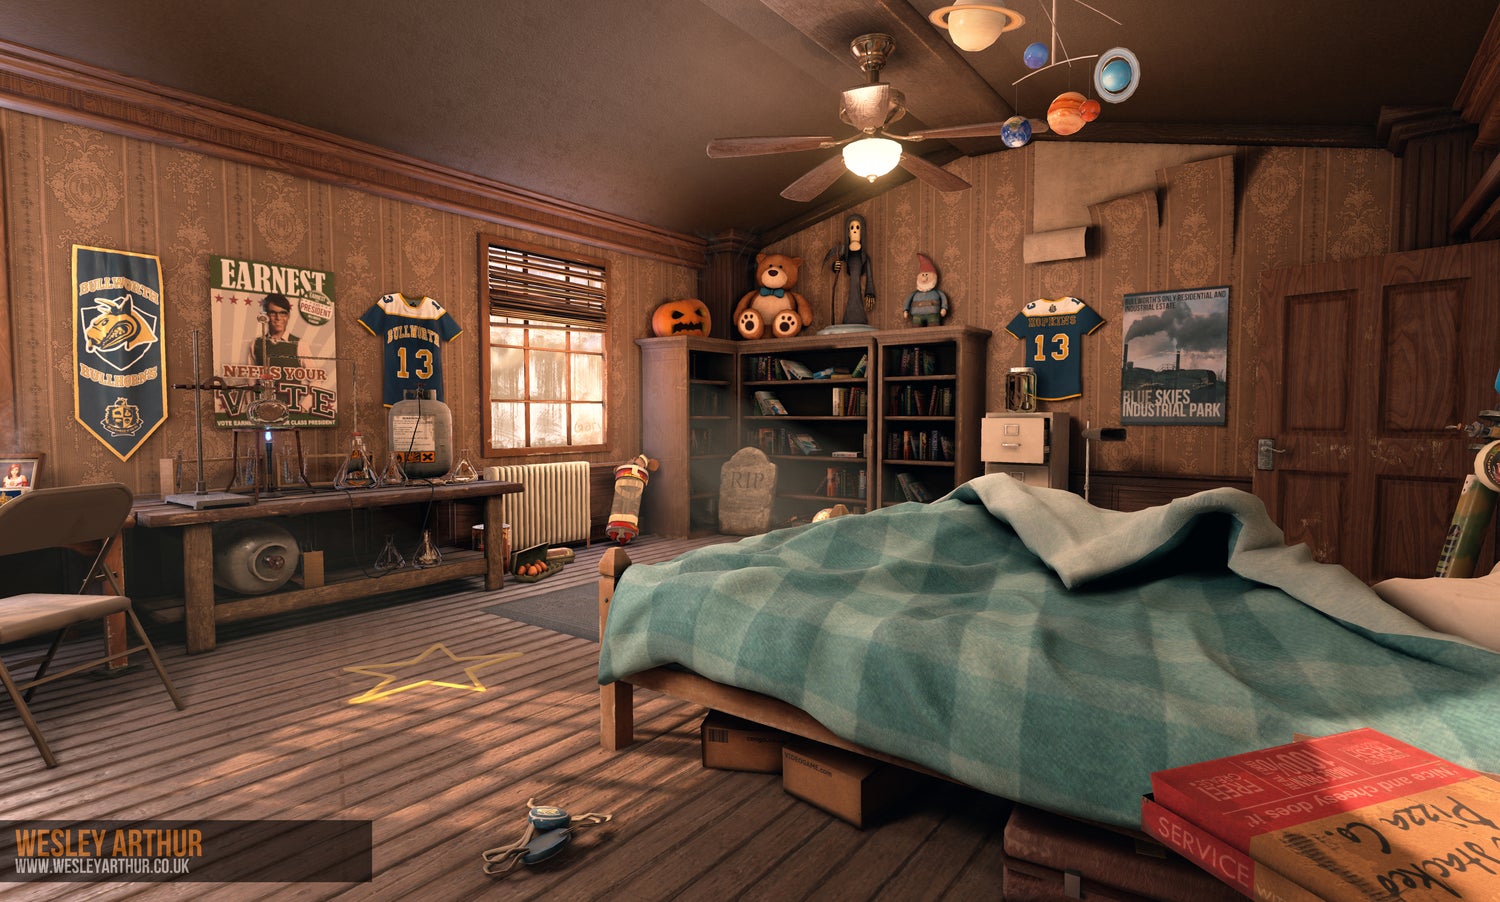 Bullworth Academy From Rockstar S Bully Gets An Hd Makeover